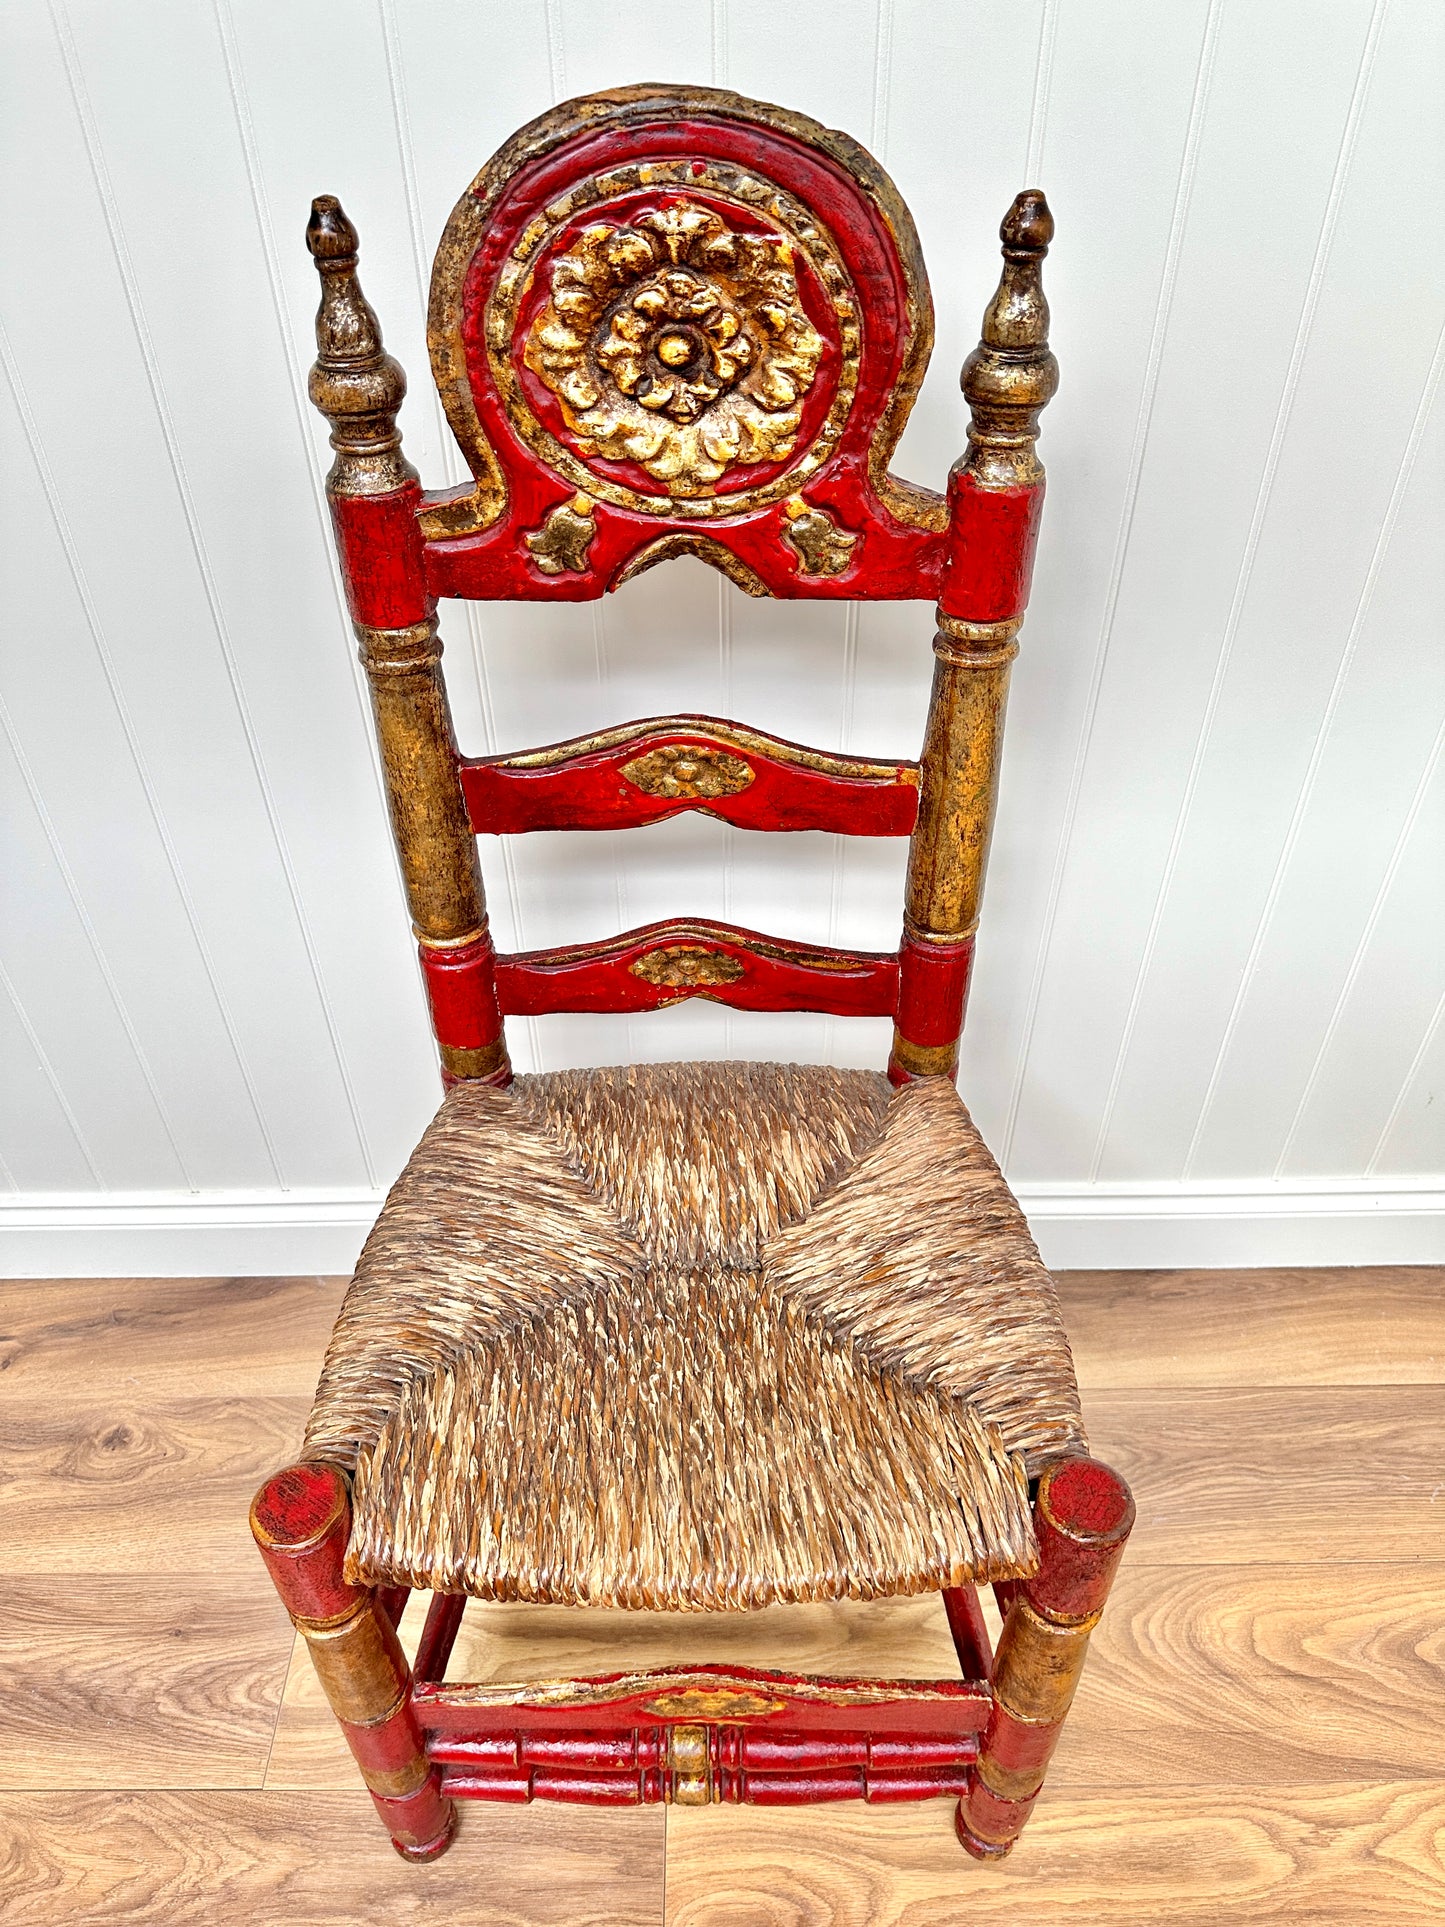 Large C19th Mallorcan Rush Seat Chair (Four Available)